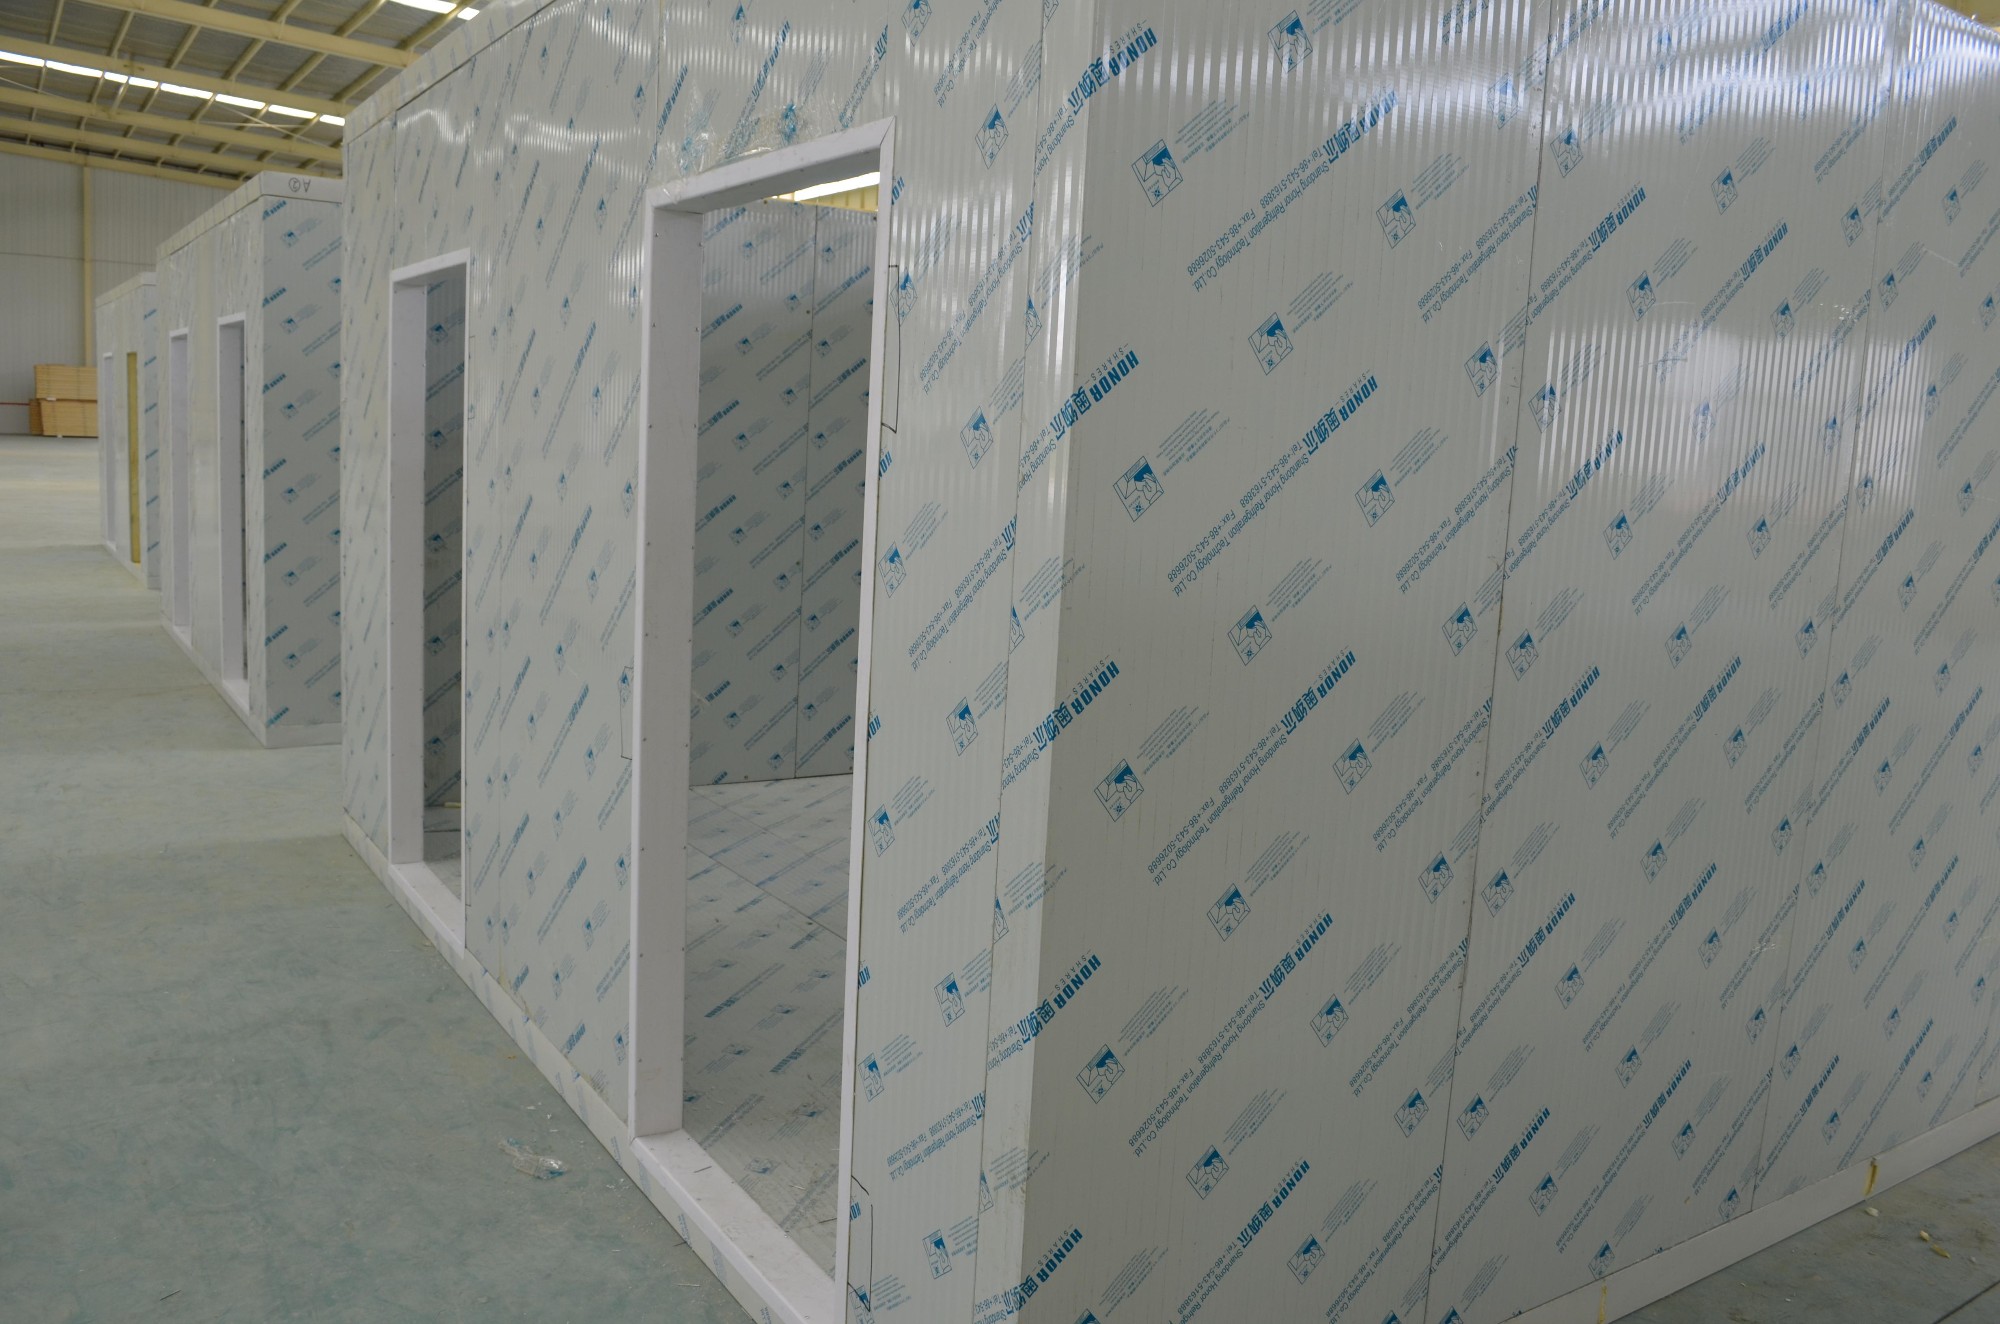 Prime Quality Cold Room Insulation Panel